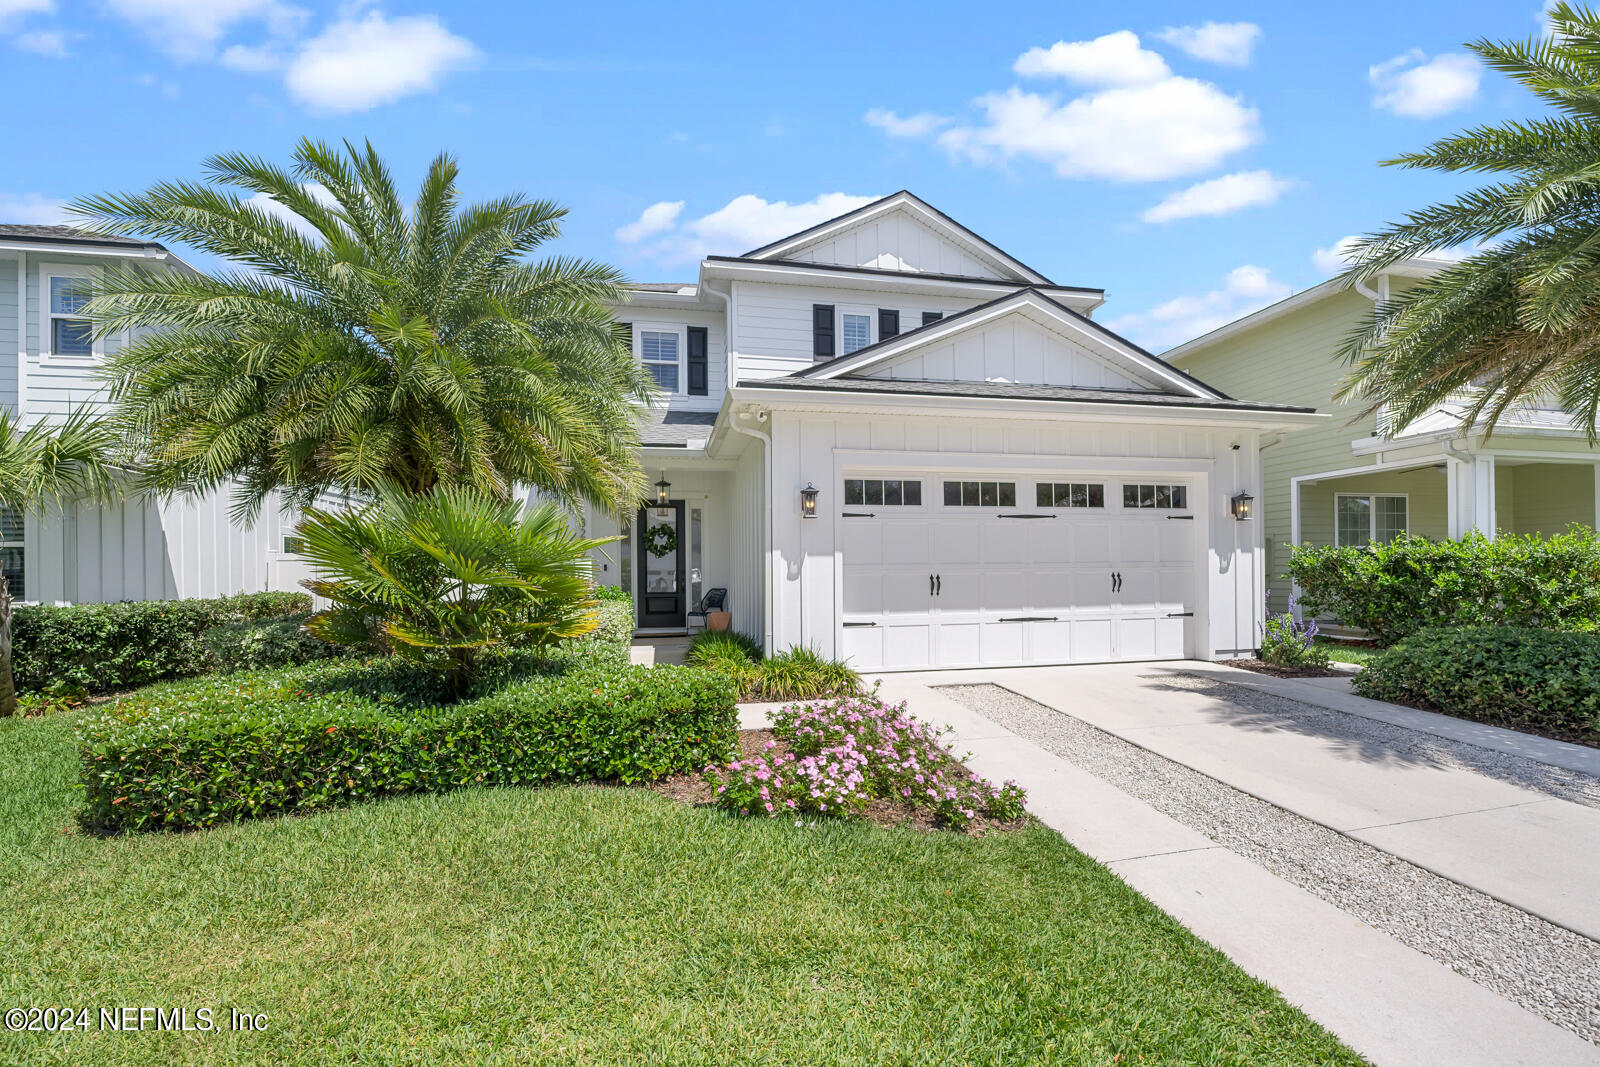 Jacksonville Beach, FL home for sale located at 3209 Horn Court, Jacksonville Beach, FL 32250